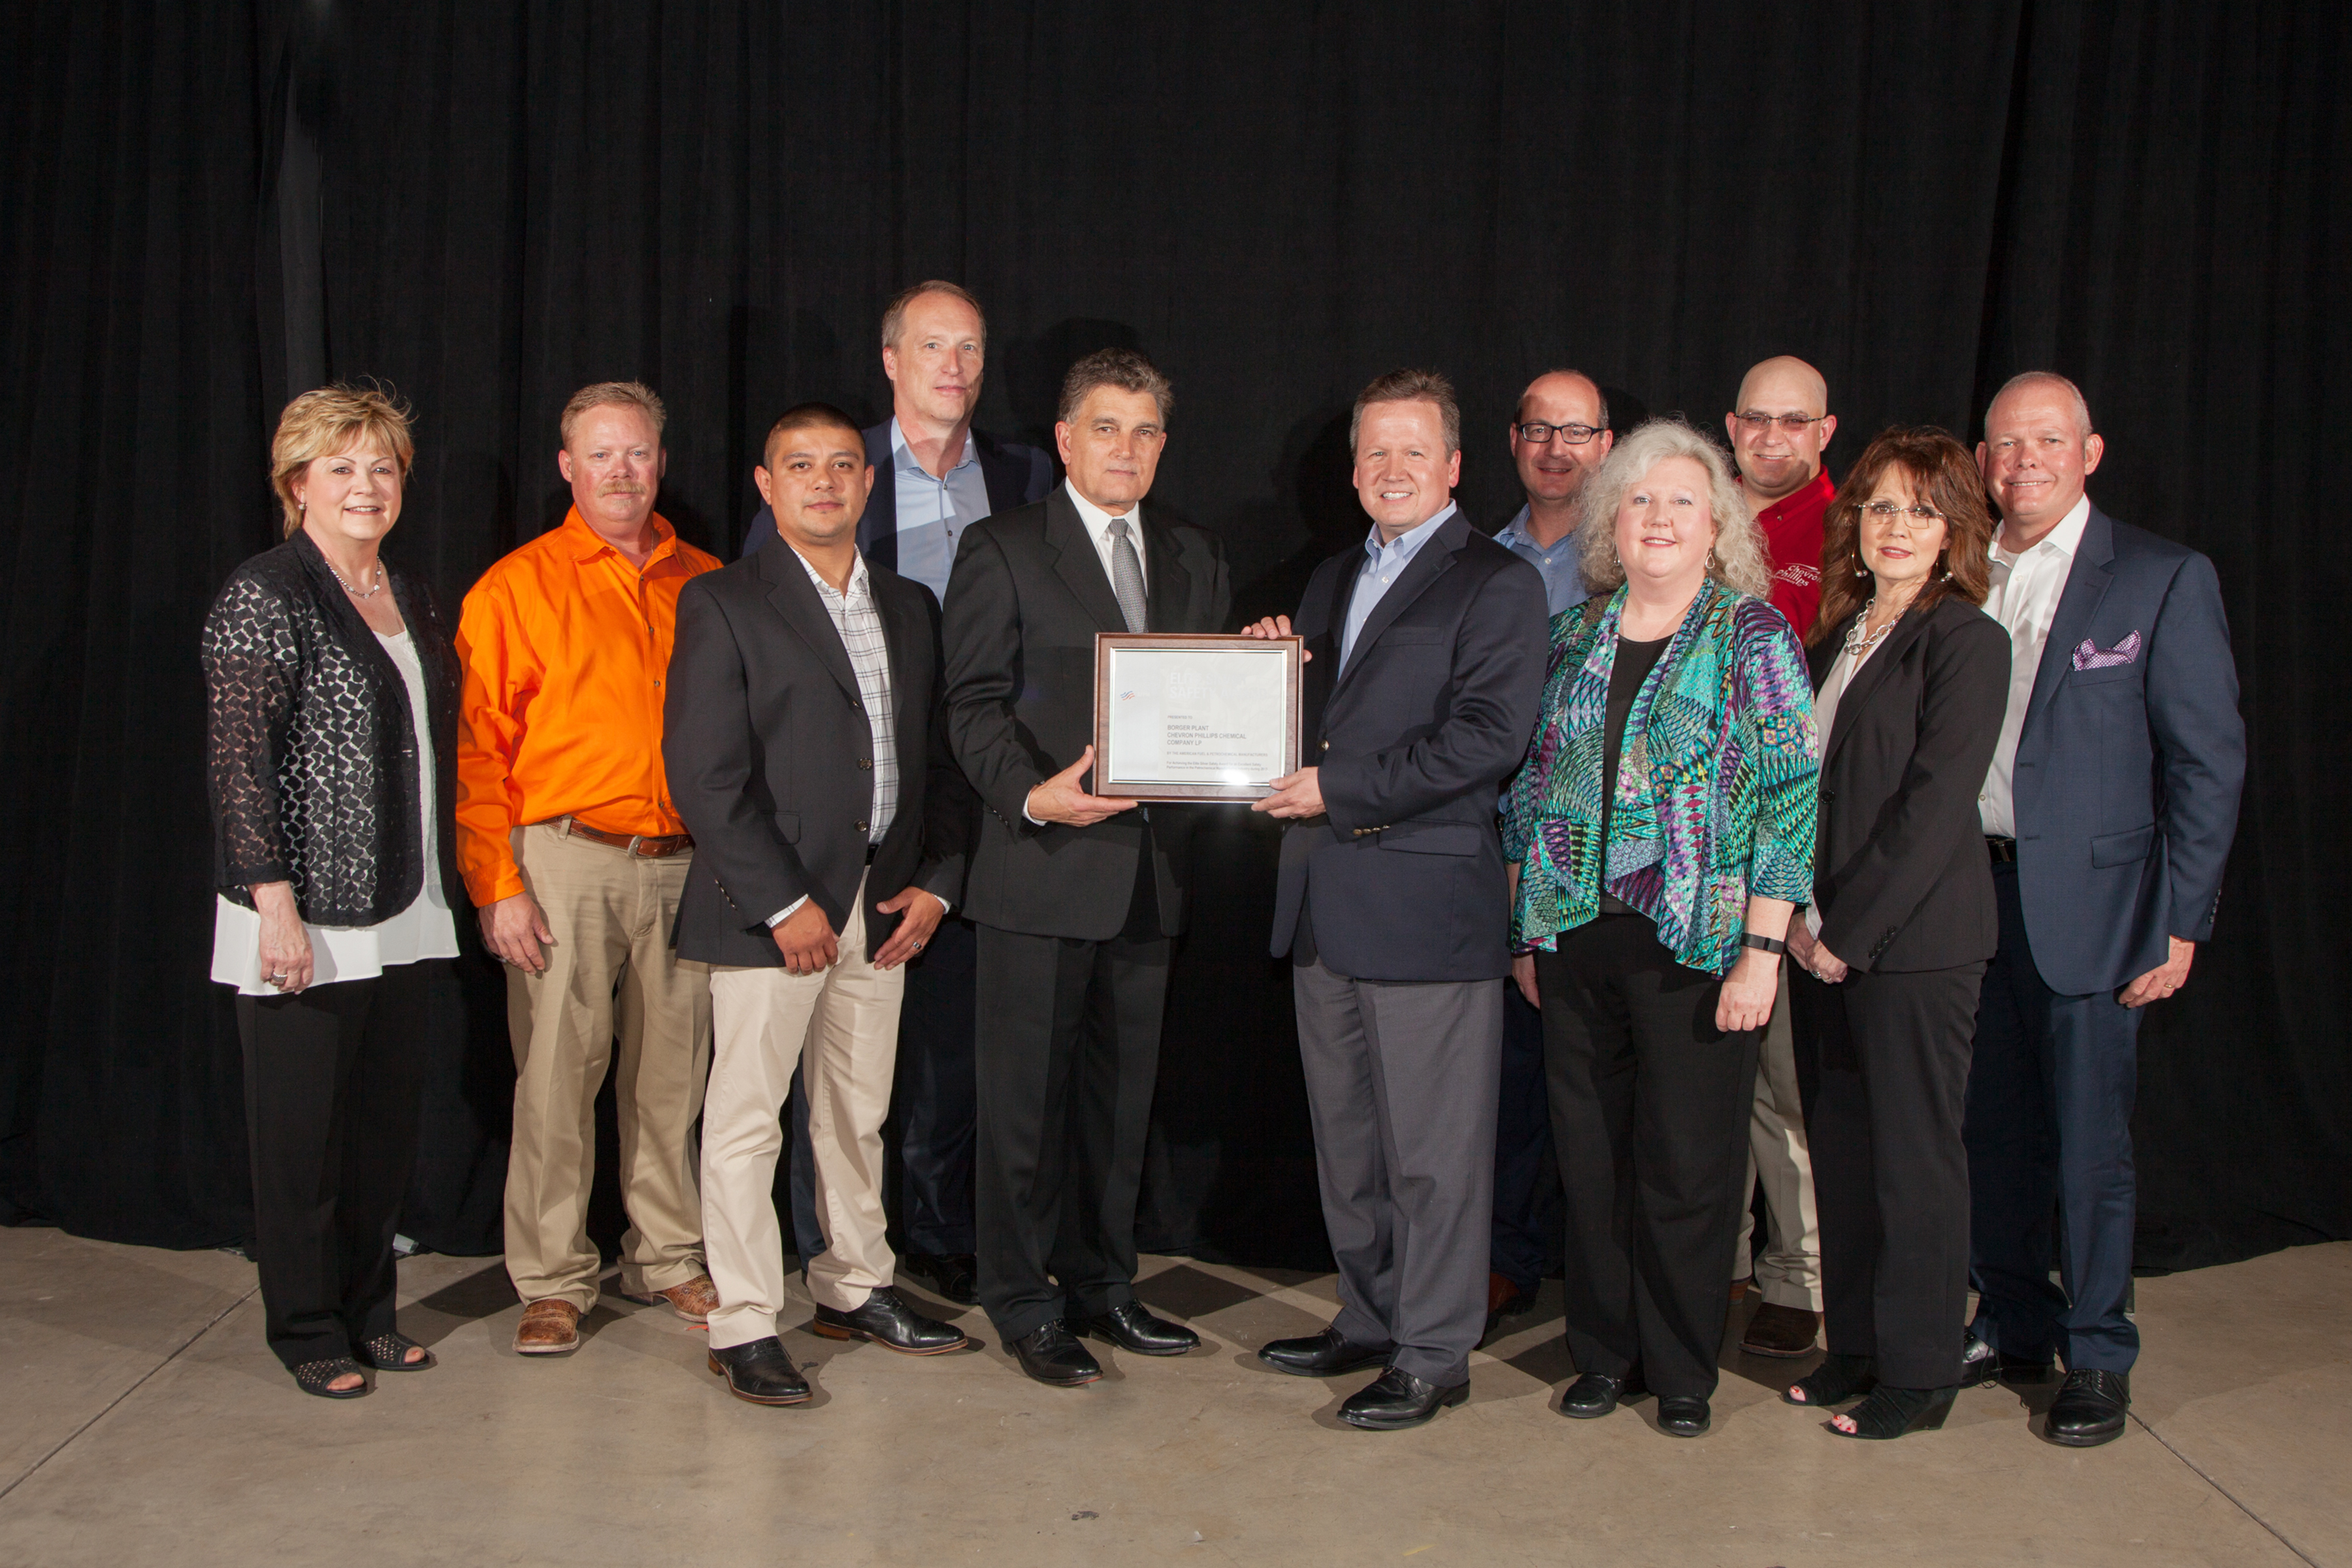  Chevron Phillips Chemical Receives American Fuel & Petrochemical Manufacturers’ Top Safety Award